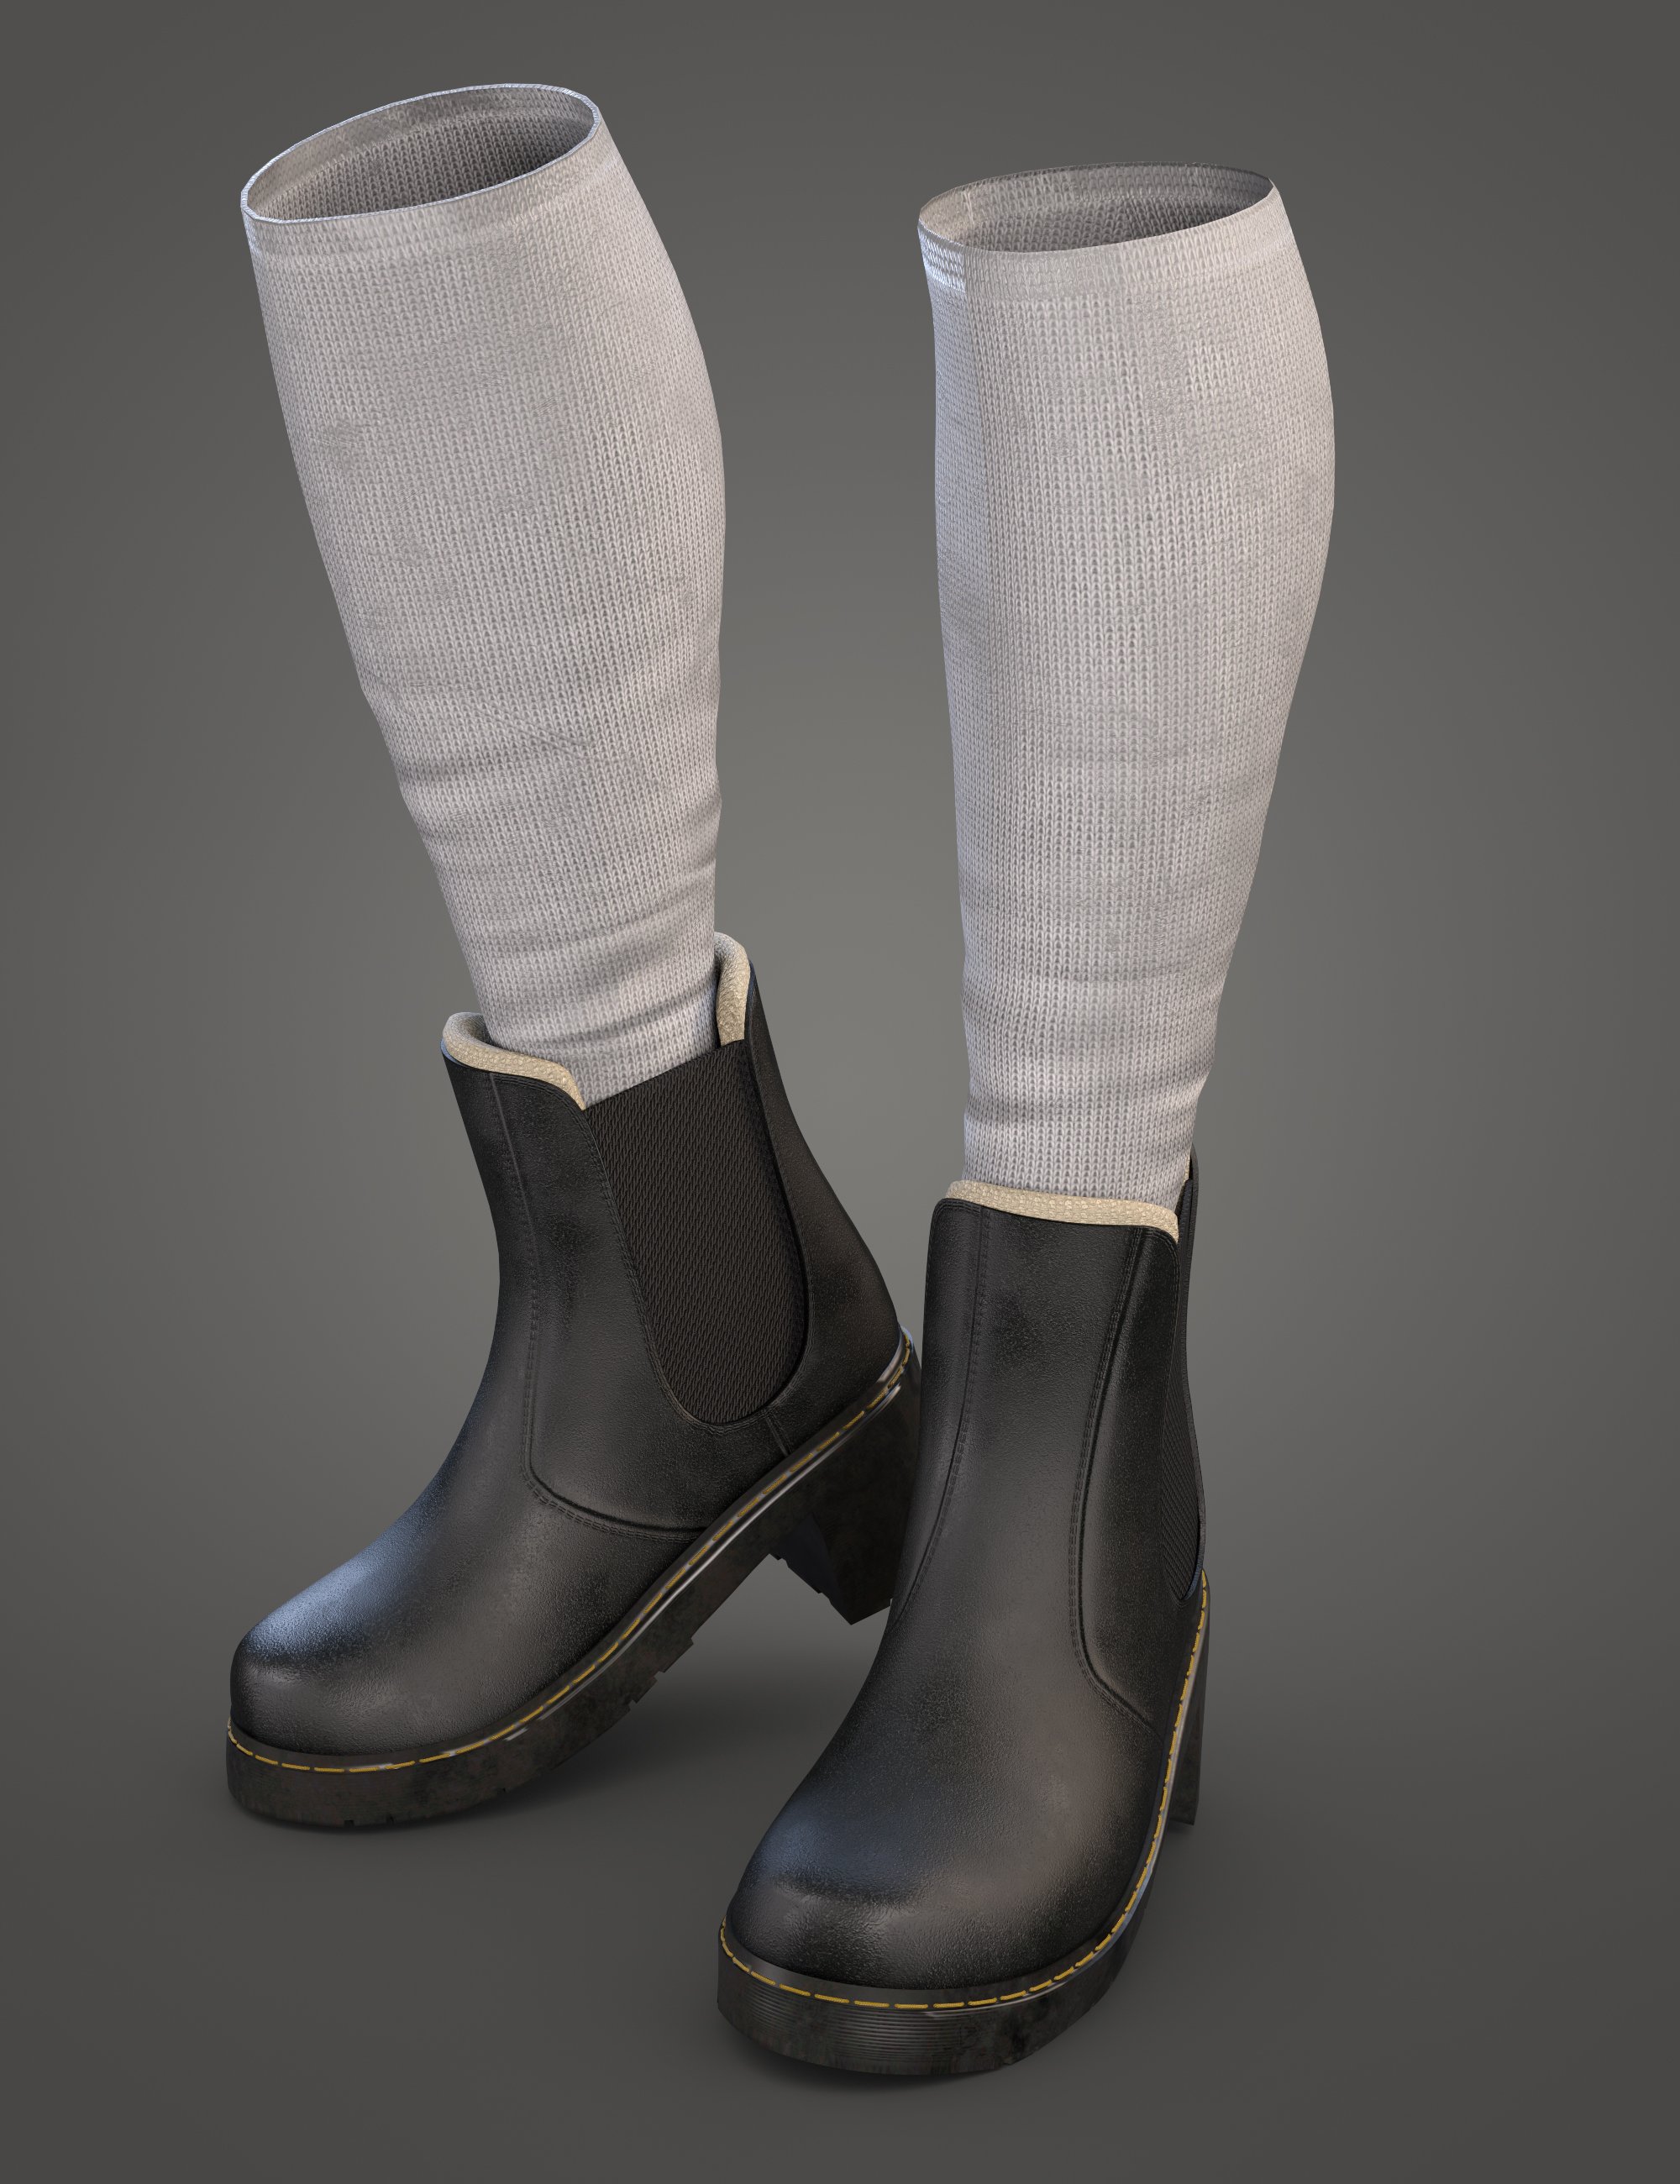 Rebel Outfit Boots and Socks for Genesis 8 Females by: fjaa3d, 3D Models by Daz 3D